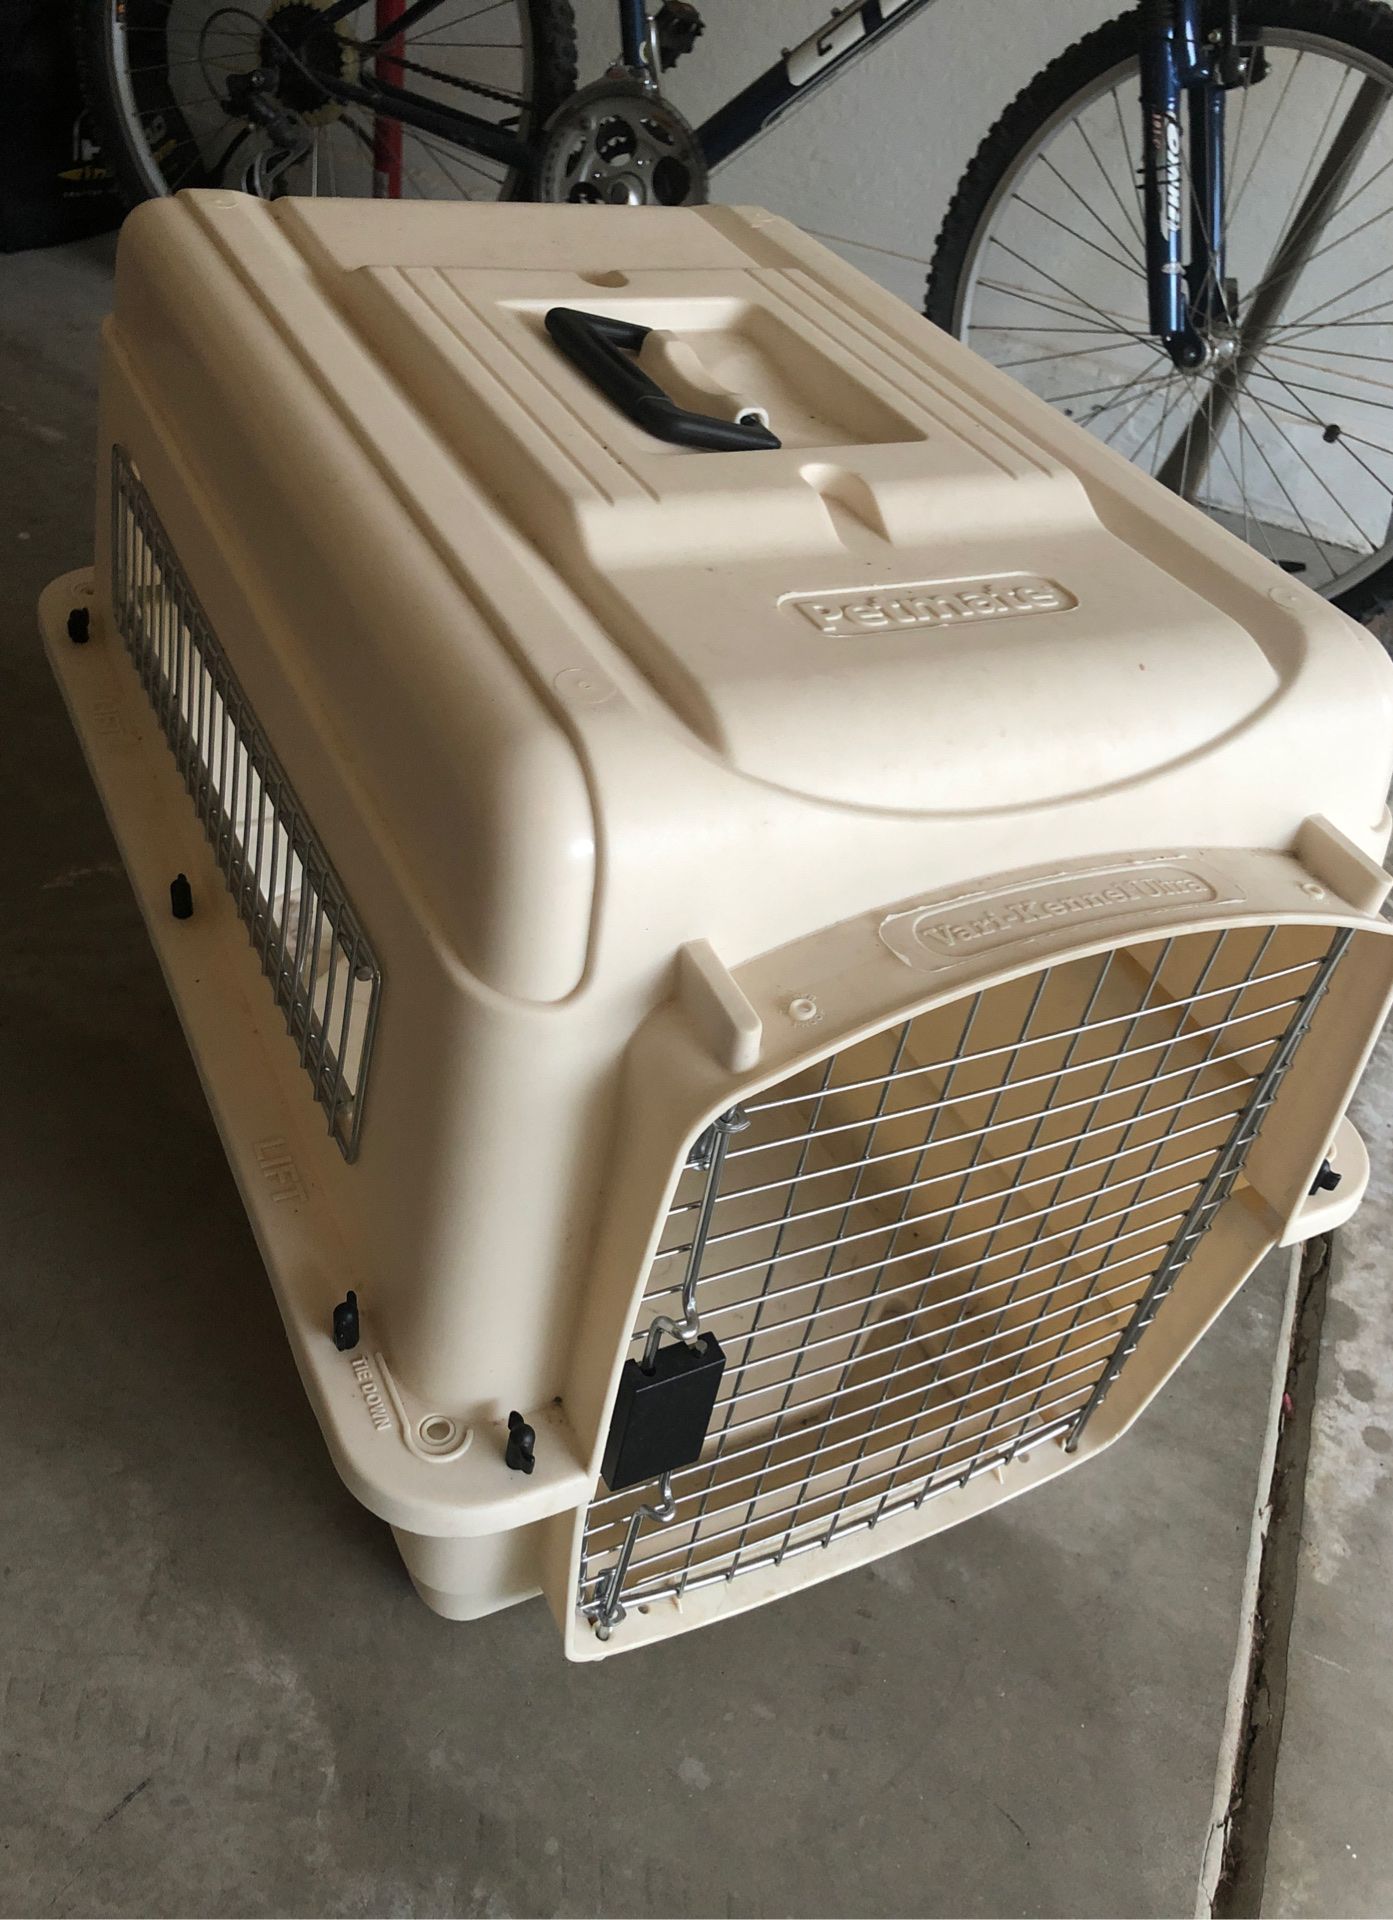 Petmate carrier kennel - for small or medium dogs